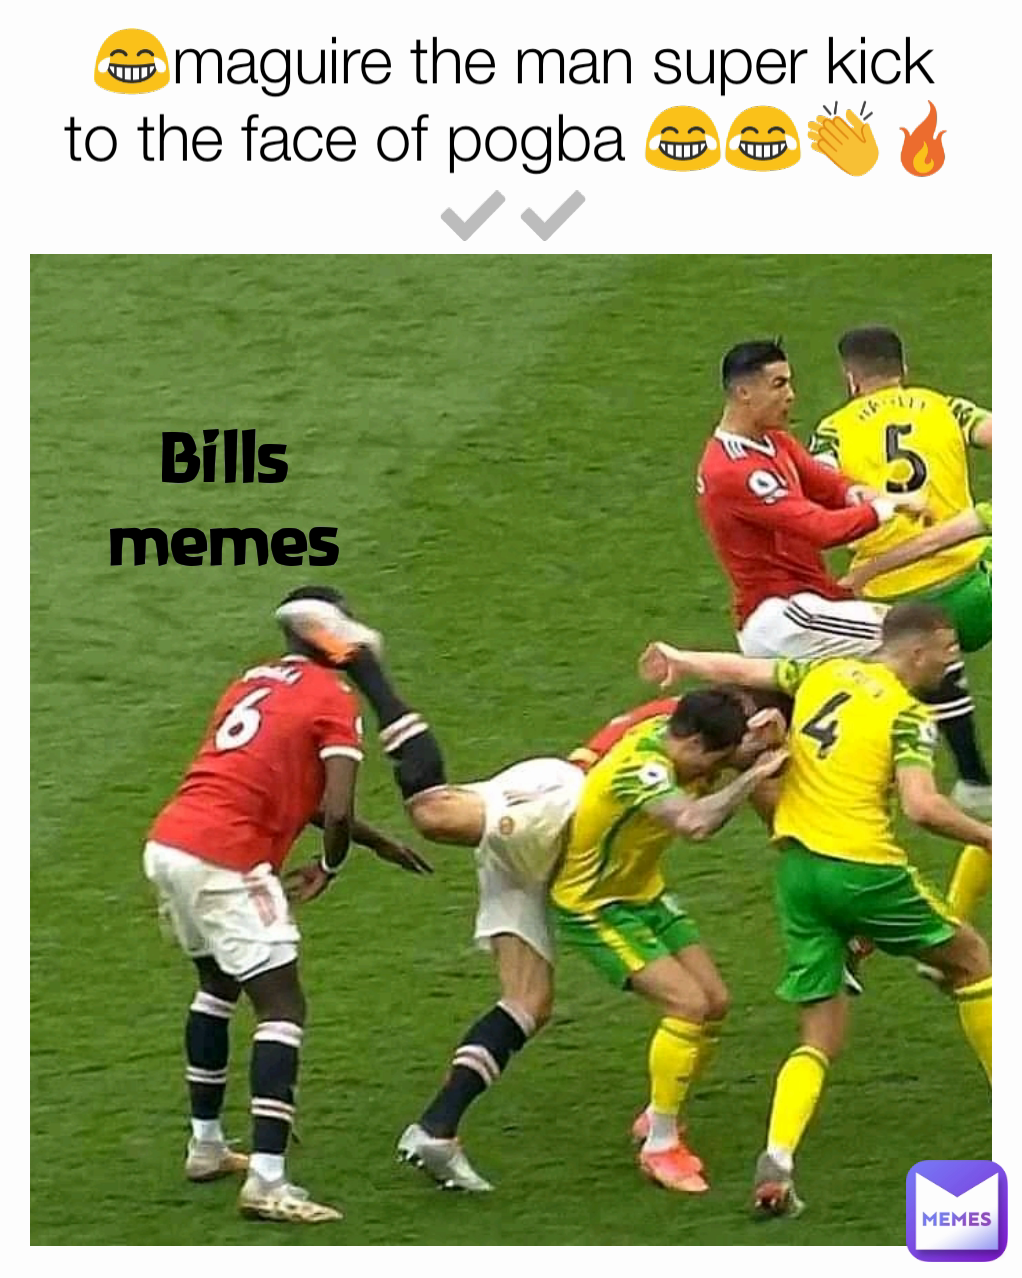 Bills memes 😂maguire the man super kick to the face of pogba 😂😂👏🔥✅✅